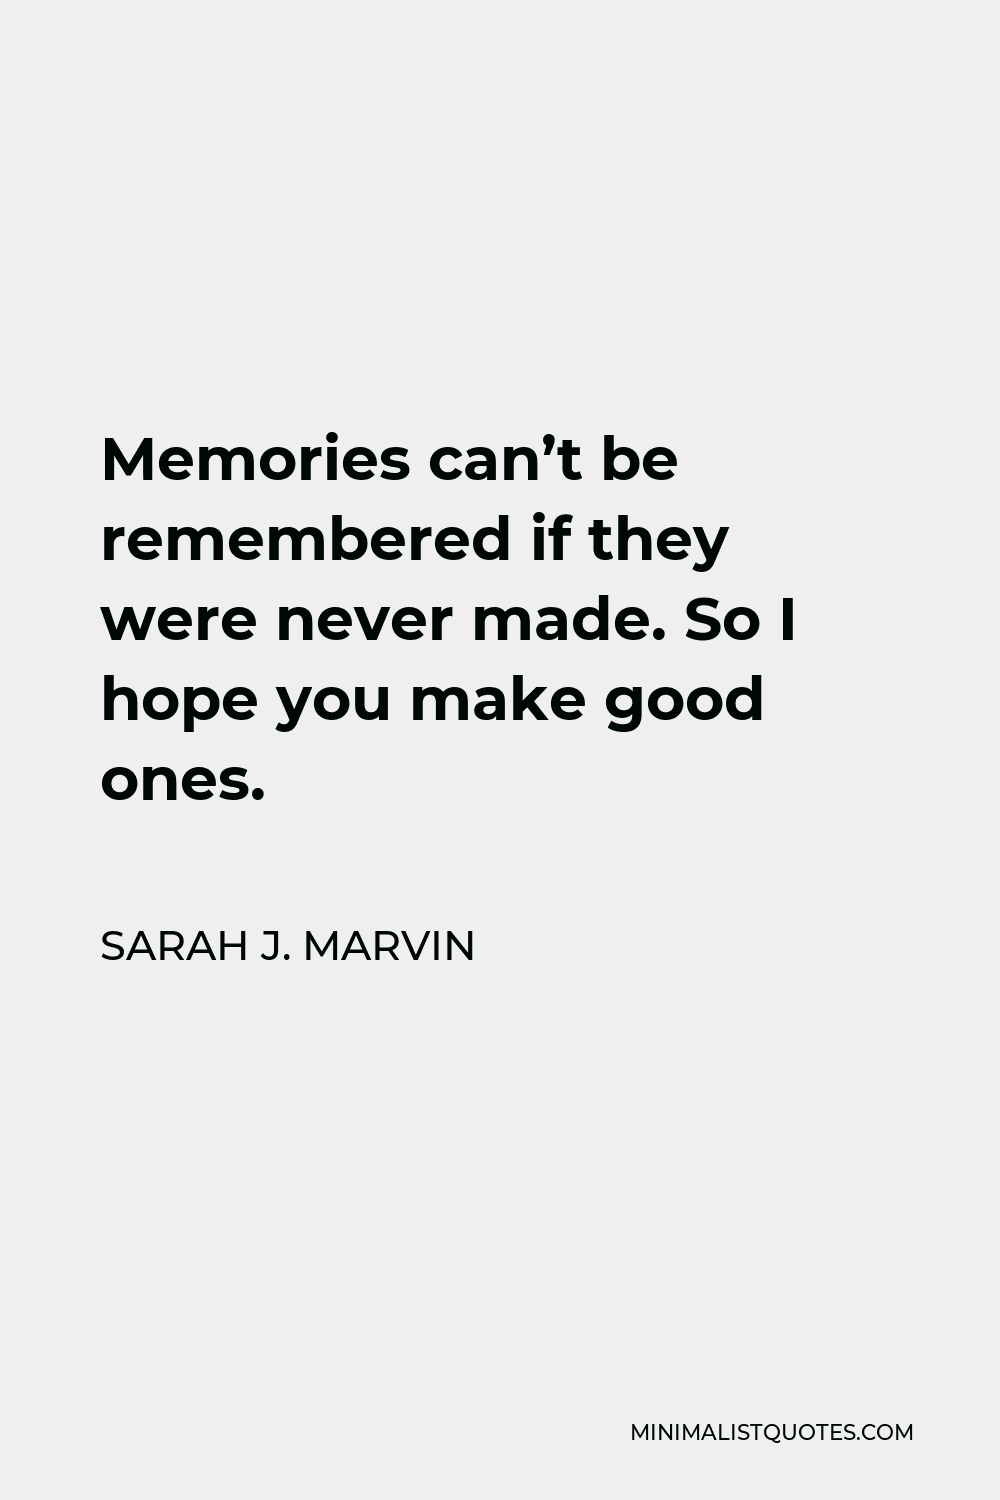 Sarah J. Marvin Quote - Memories can’t be remembered if they were never made. So I hope you make good ones.